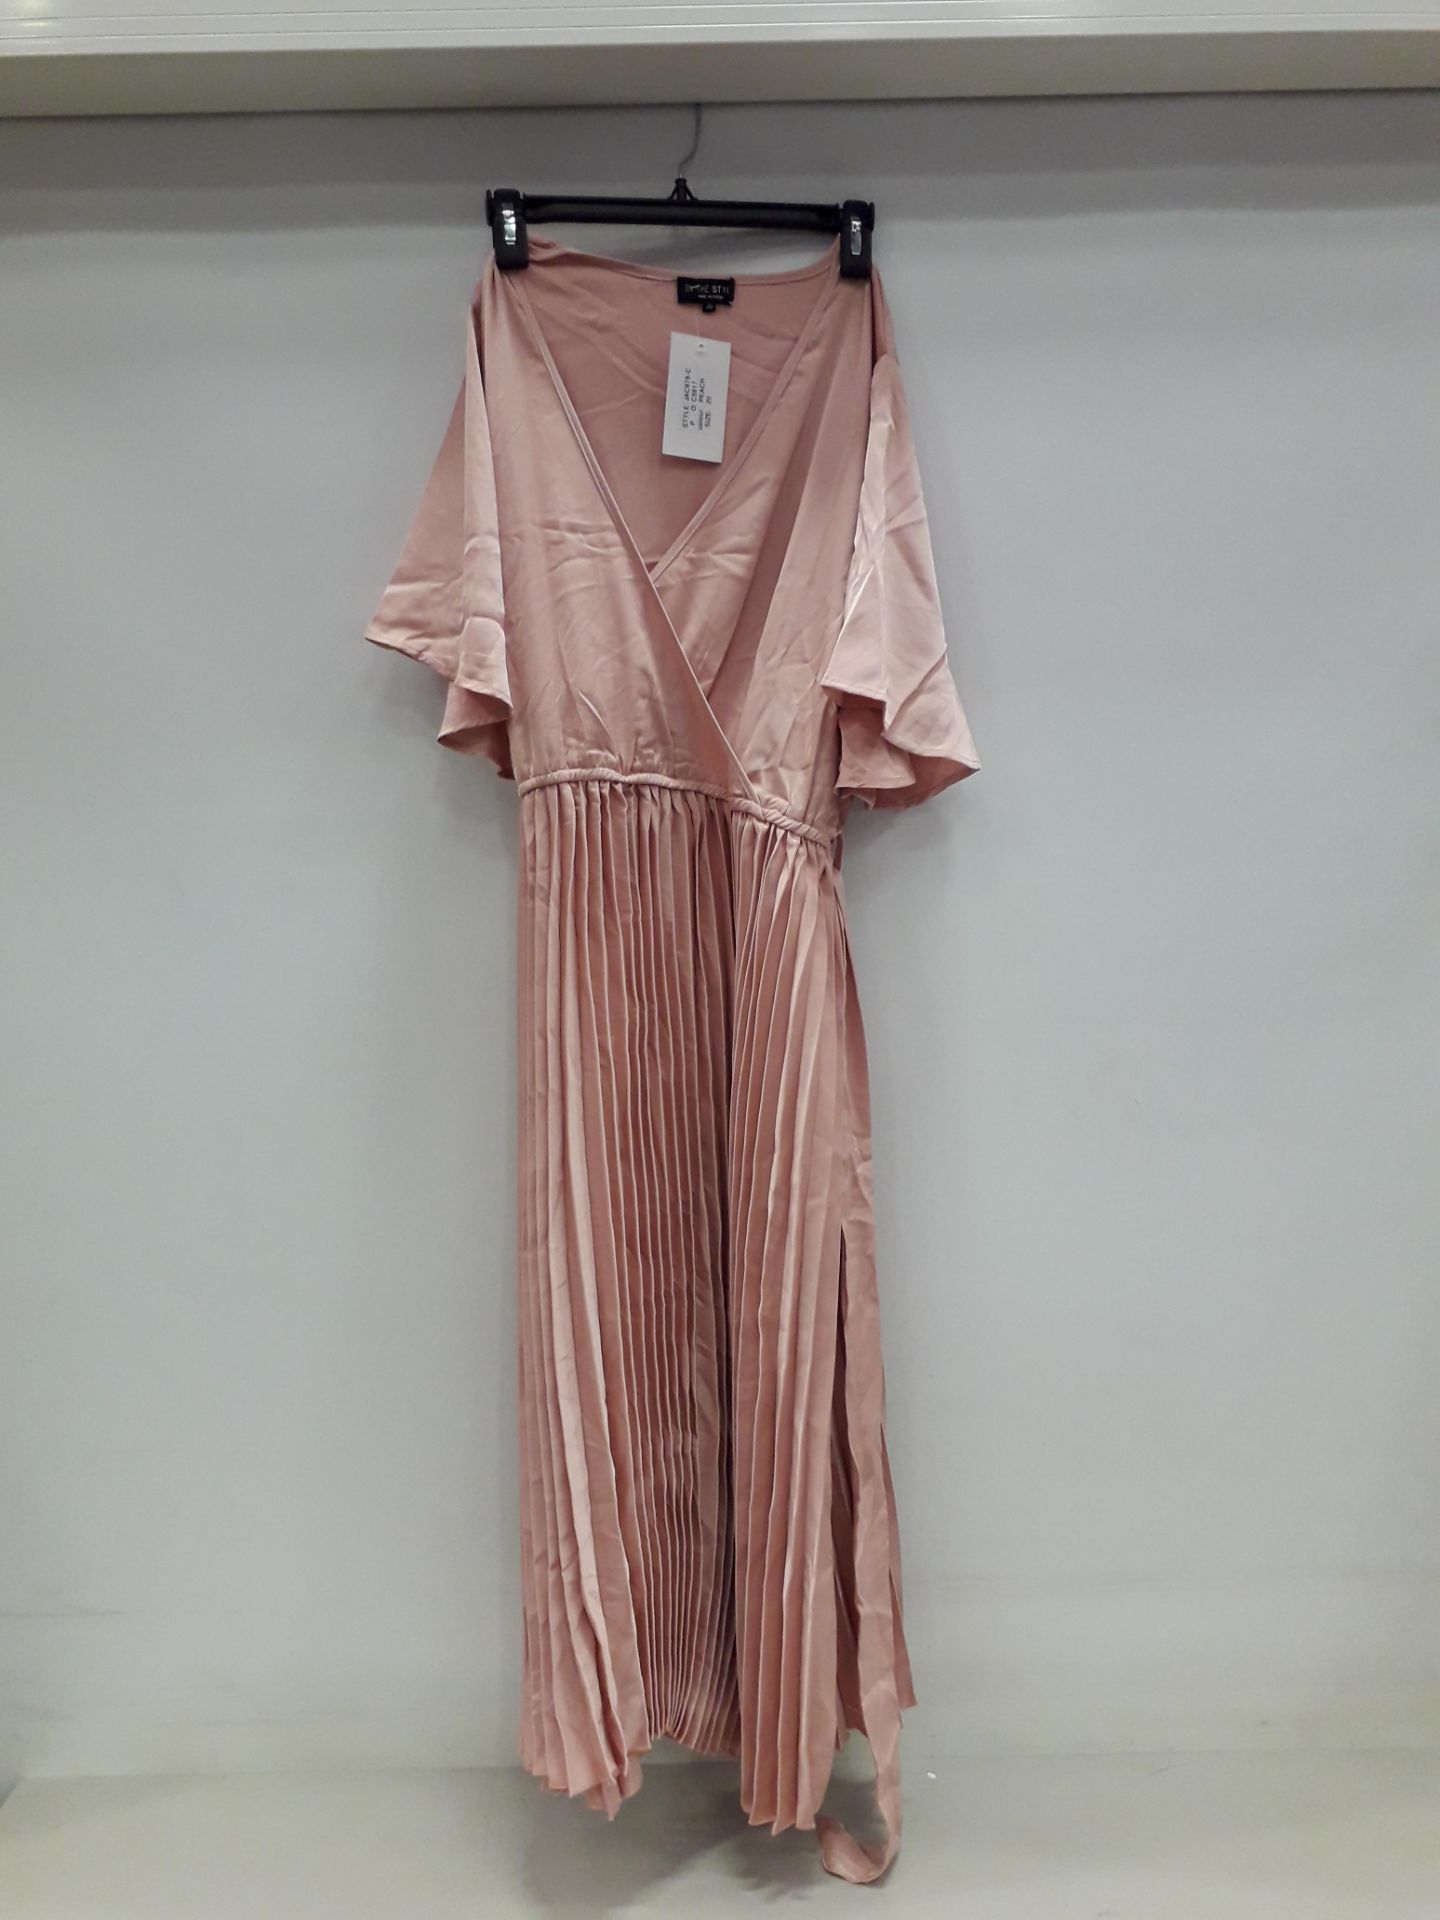 33 X BRAND NEW IN THE STYLE MIDI DRESS IN PEACH PLEATED COLOUR AND SIZES TO INCLUDE ( 18 / 20 )